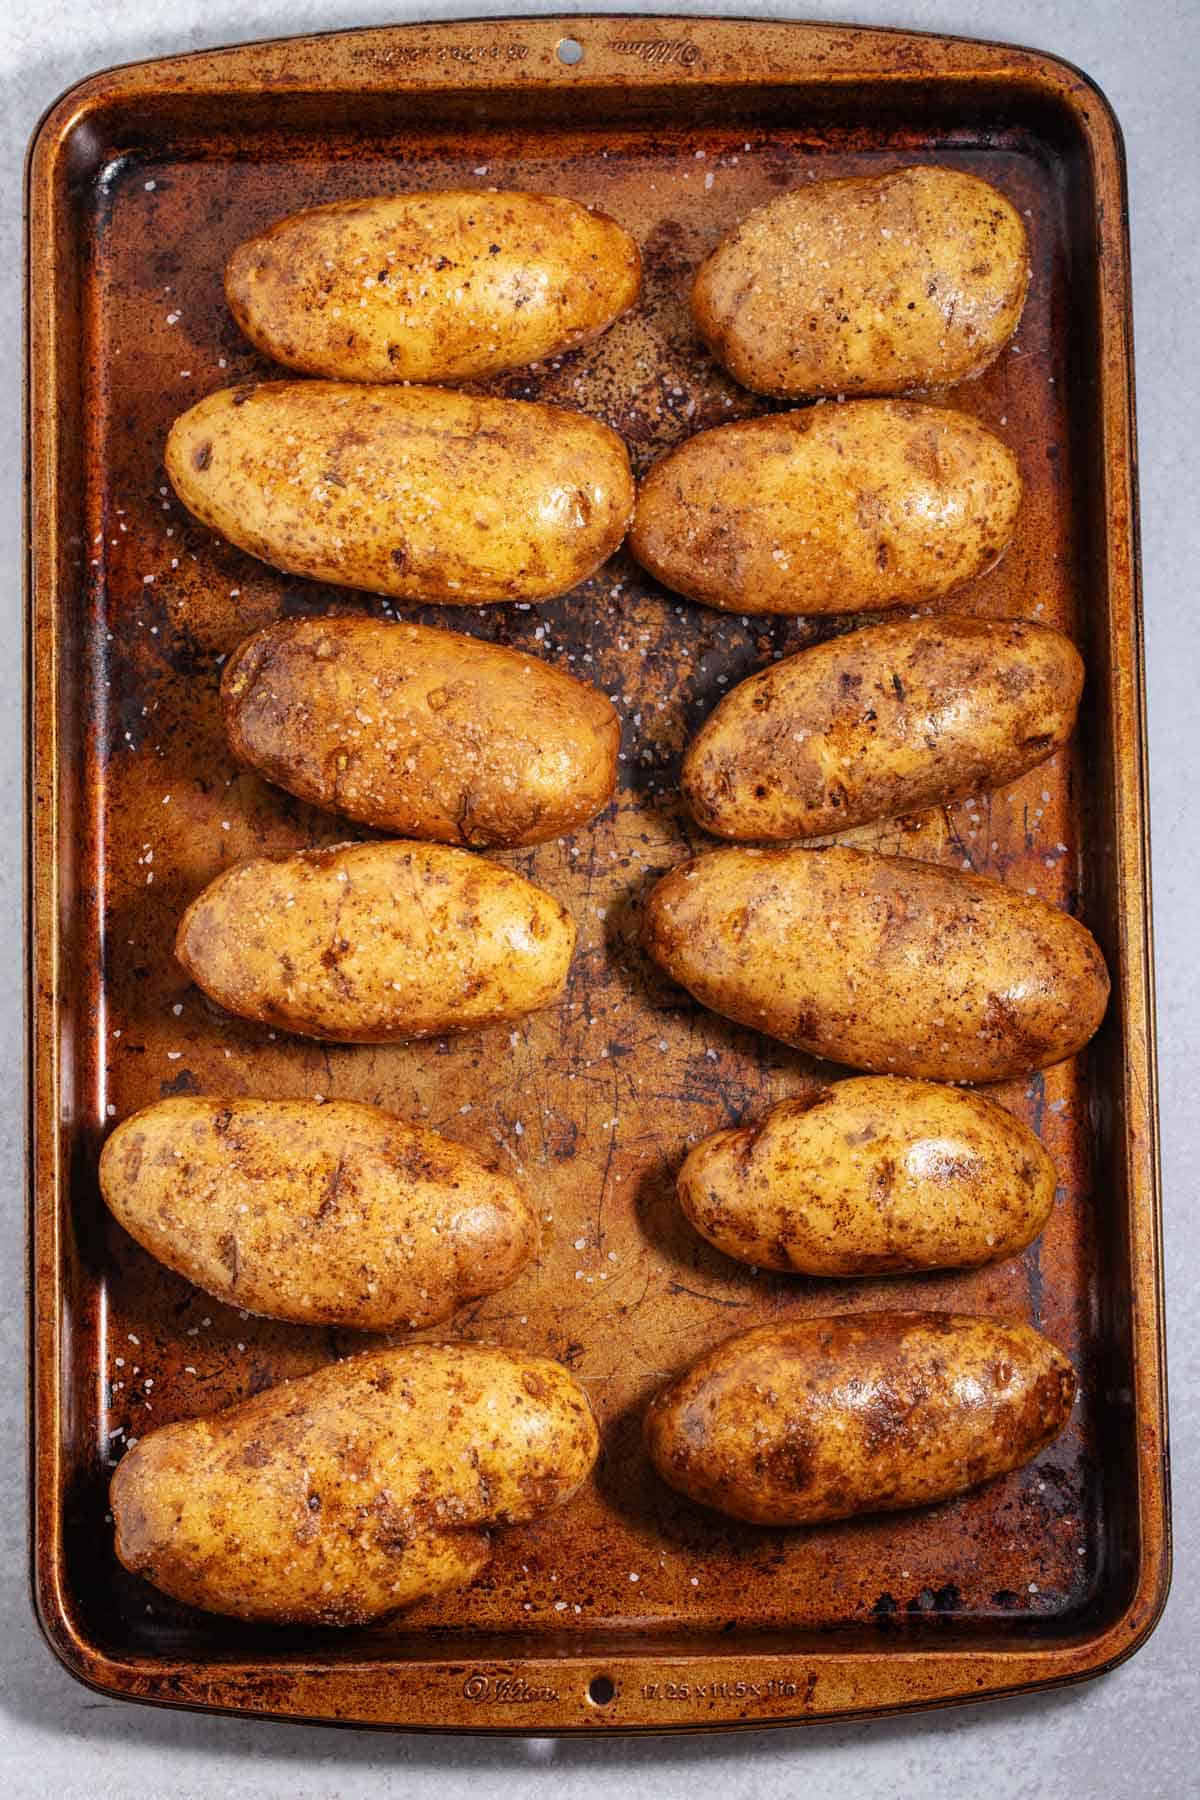 Whole potatoes on a baking pan waiting to go in the oven.